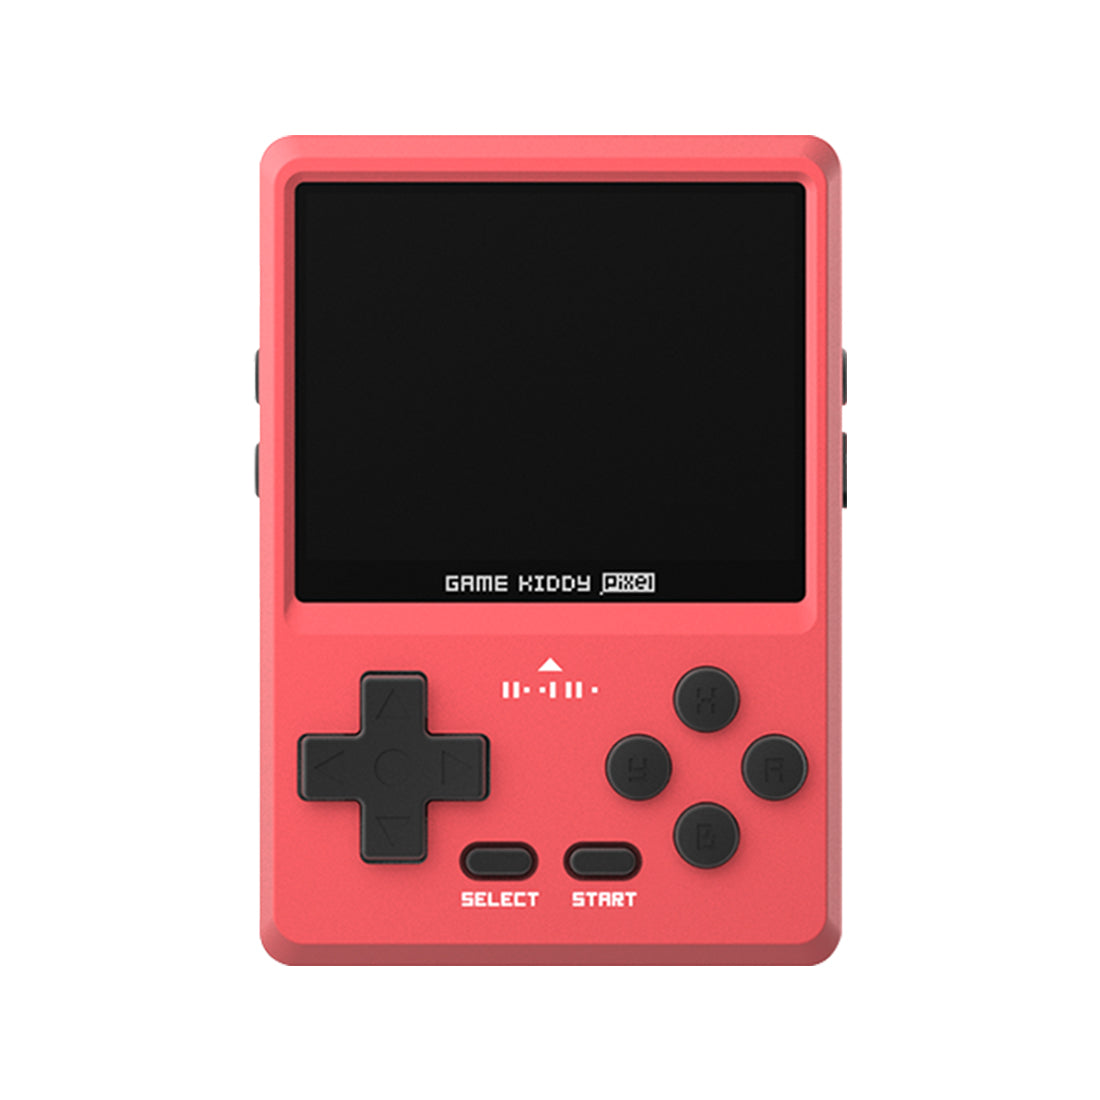 litnxt-gkd-pixel-2.4-Inch-metal-portable-handheld-game-console-RED